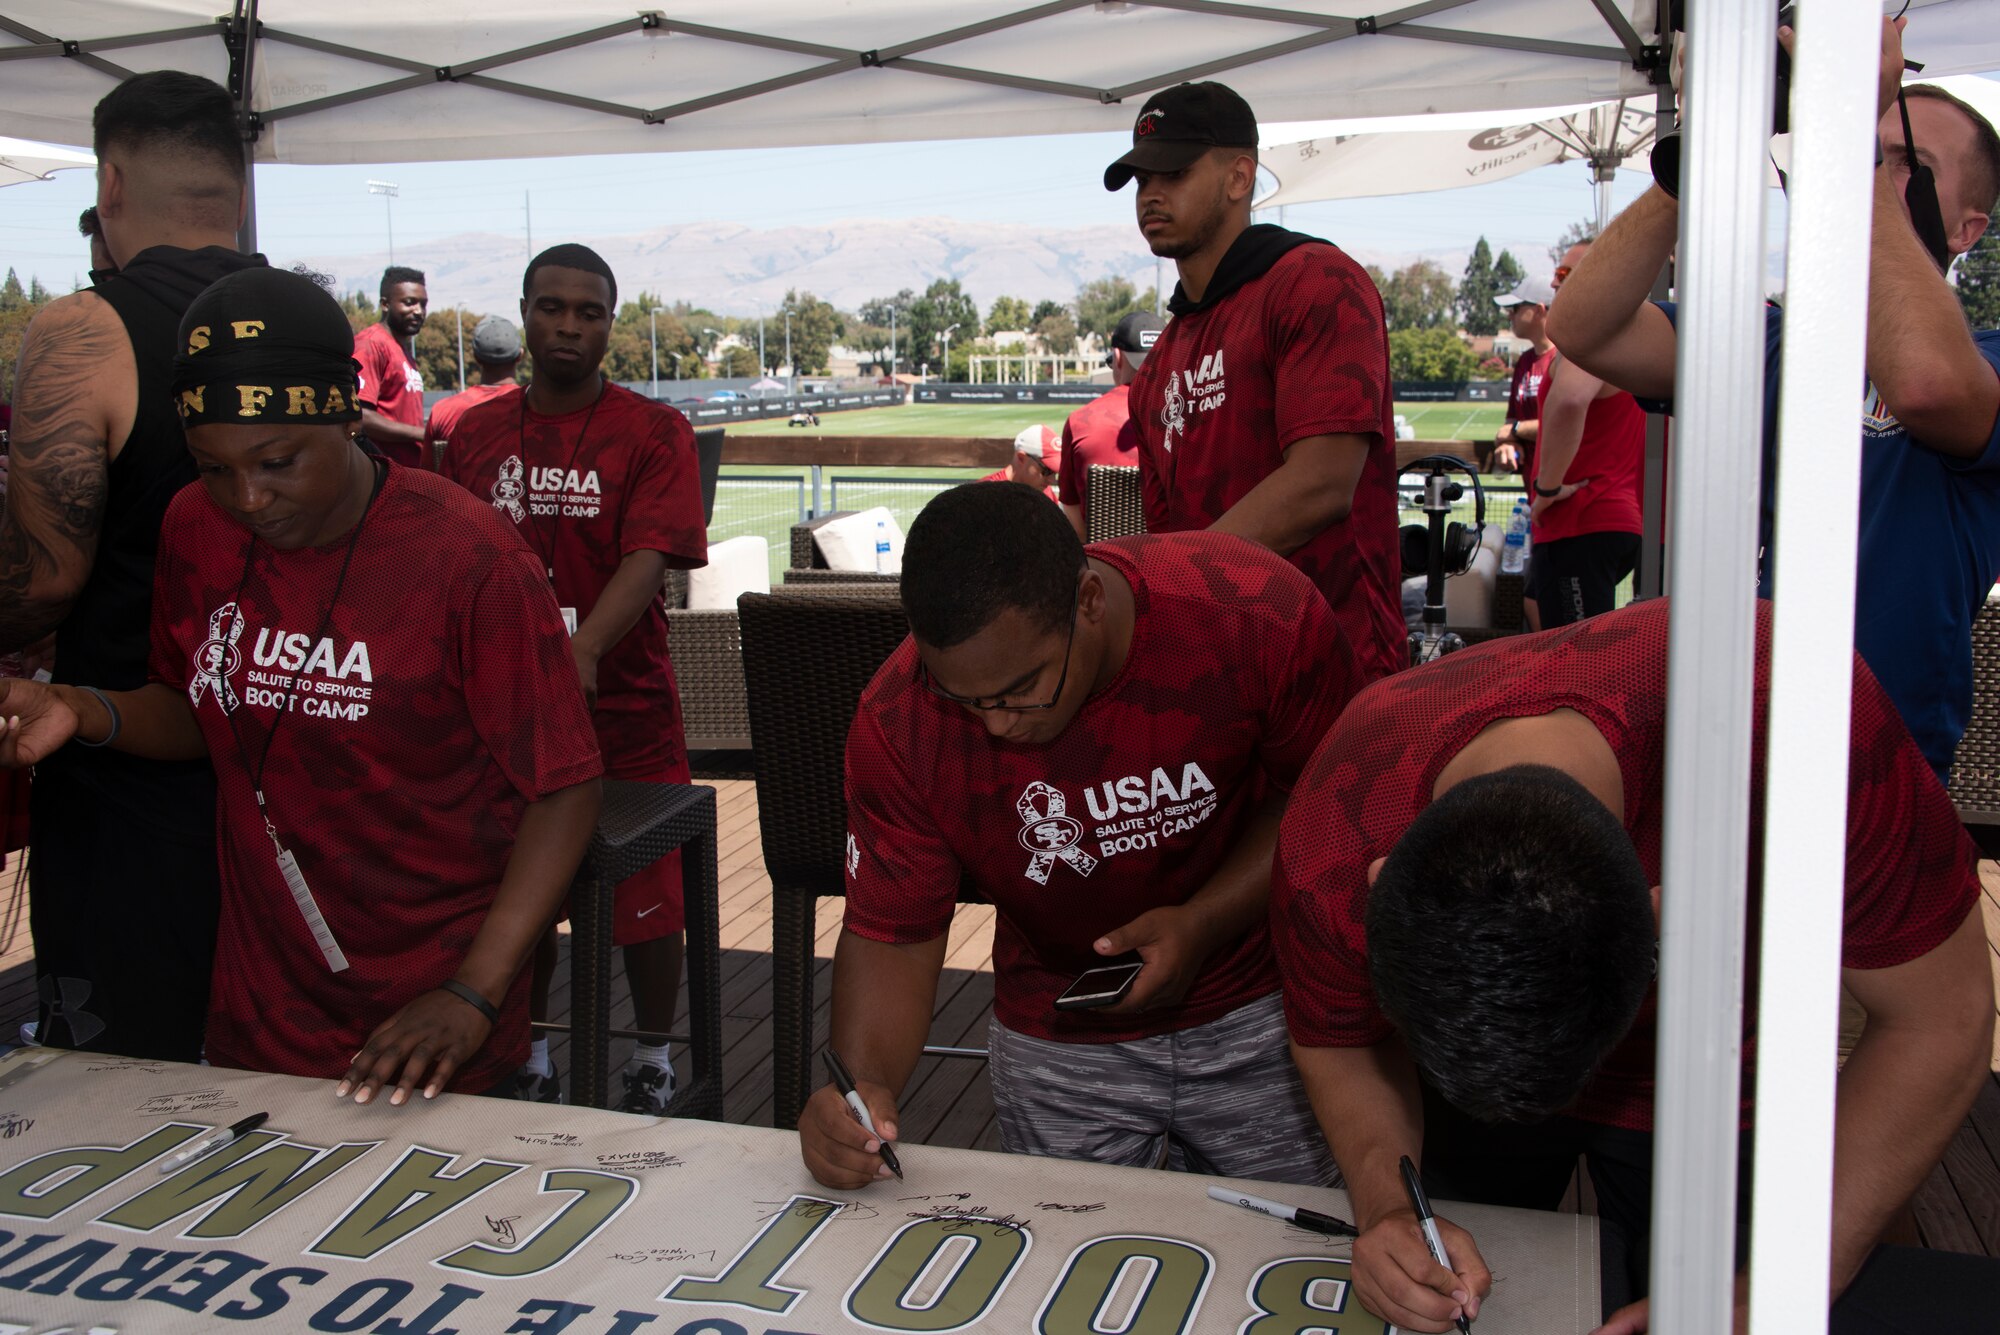 U.S. Air Force Airmen from Travis Air Force Base, California, sign a ‘Salute to Service’ banner Aug. 13, 2019, during the Salute to Service Boot Camp in Santa Clara, California. The event provided Airmen with an opportunity to interact with NFL players and compete against one another in a variety of athletic drills. (U.S. Air Force photo by Tech. Sgt. James Hodgman)